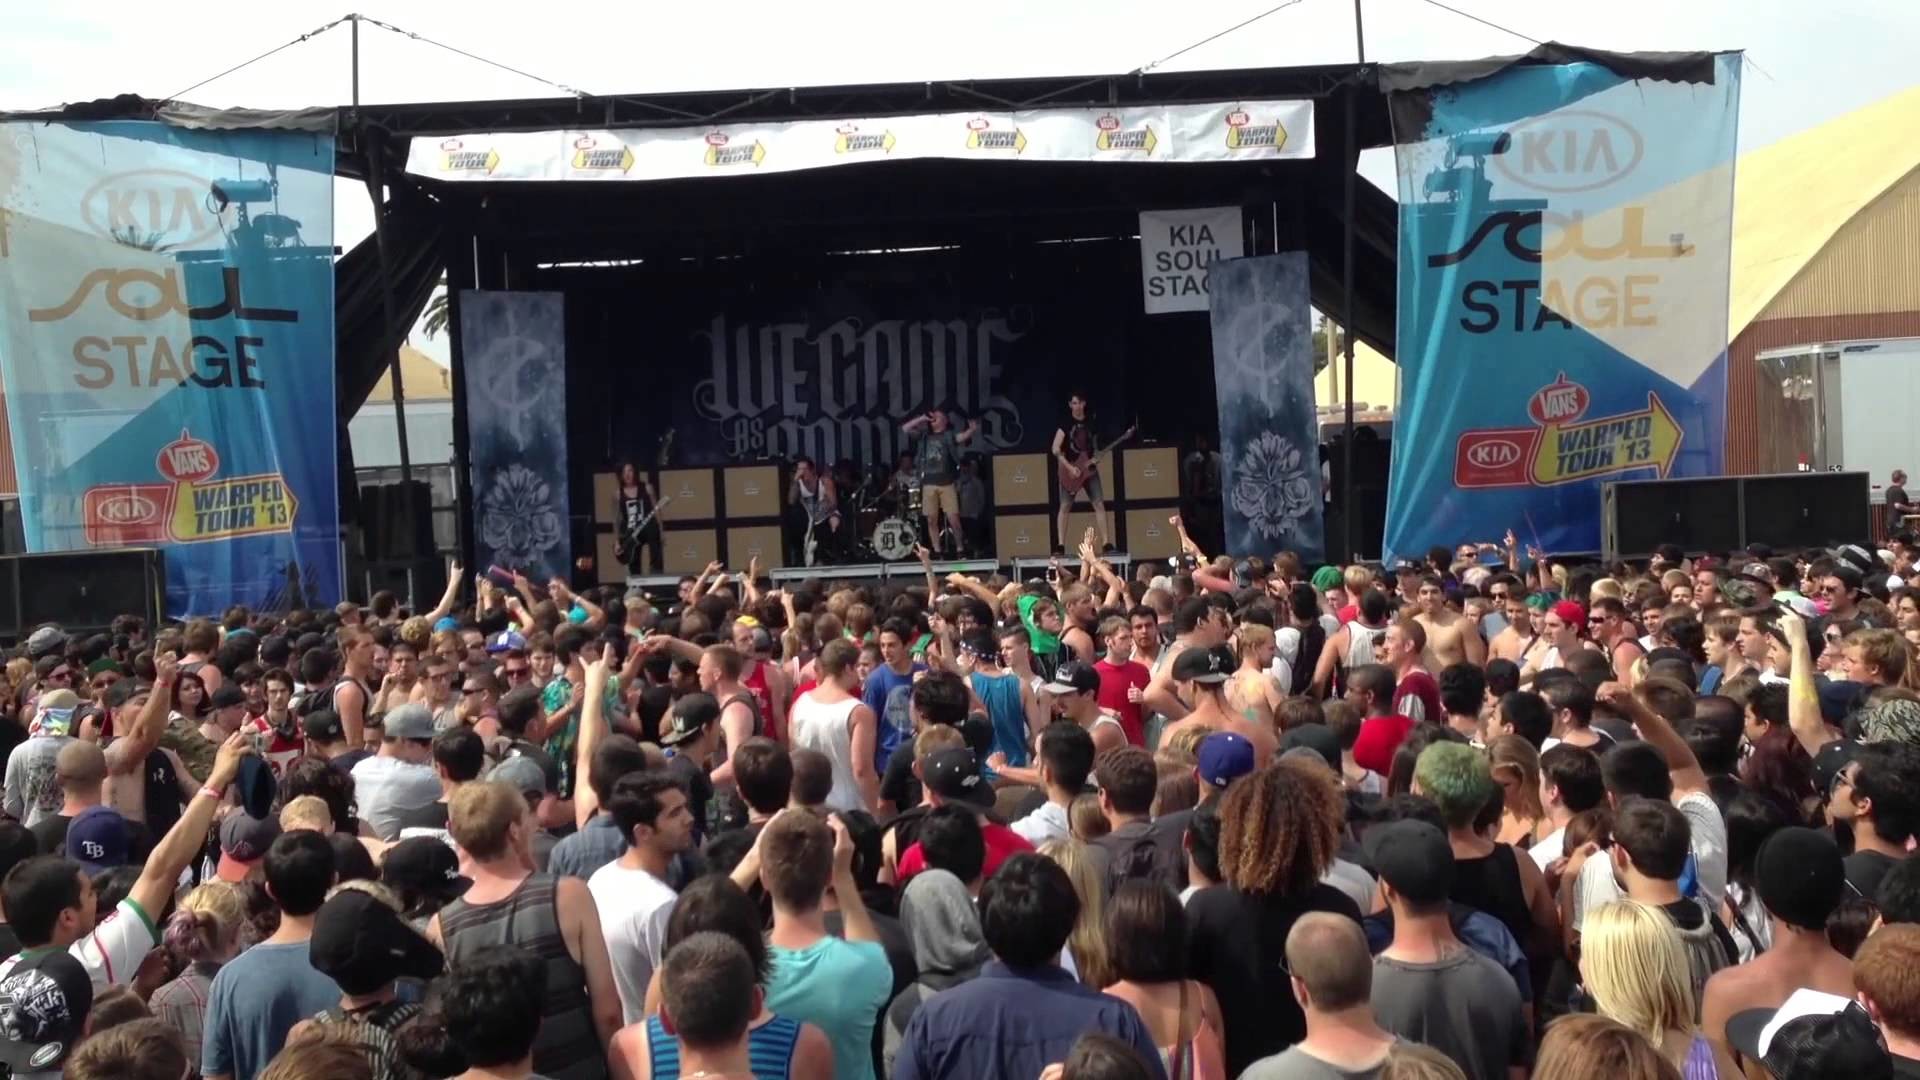 1920x1080 We Came as Romans posts new video for 'Tracing Back Roots' from Warped Tour